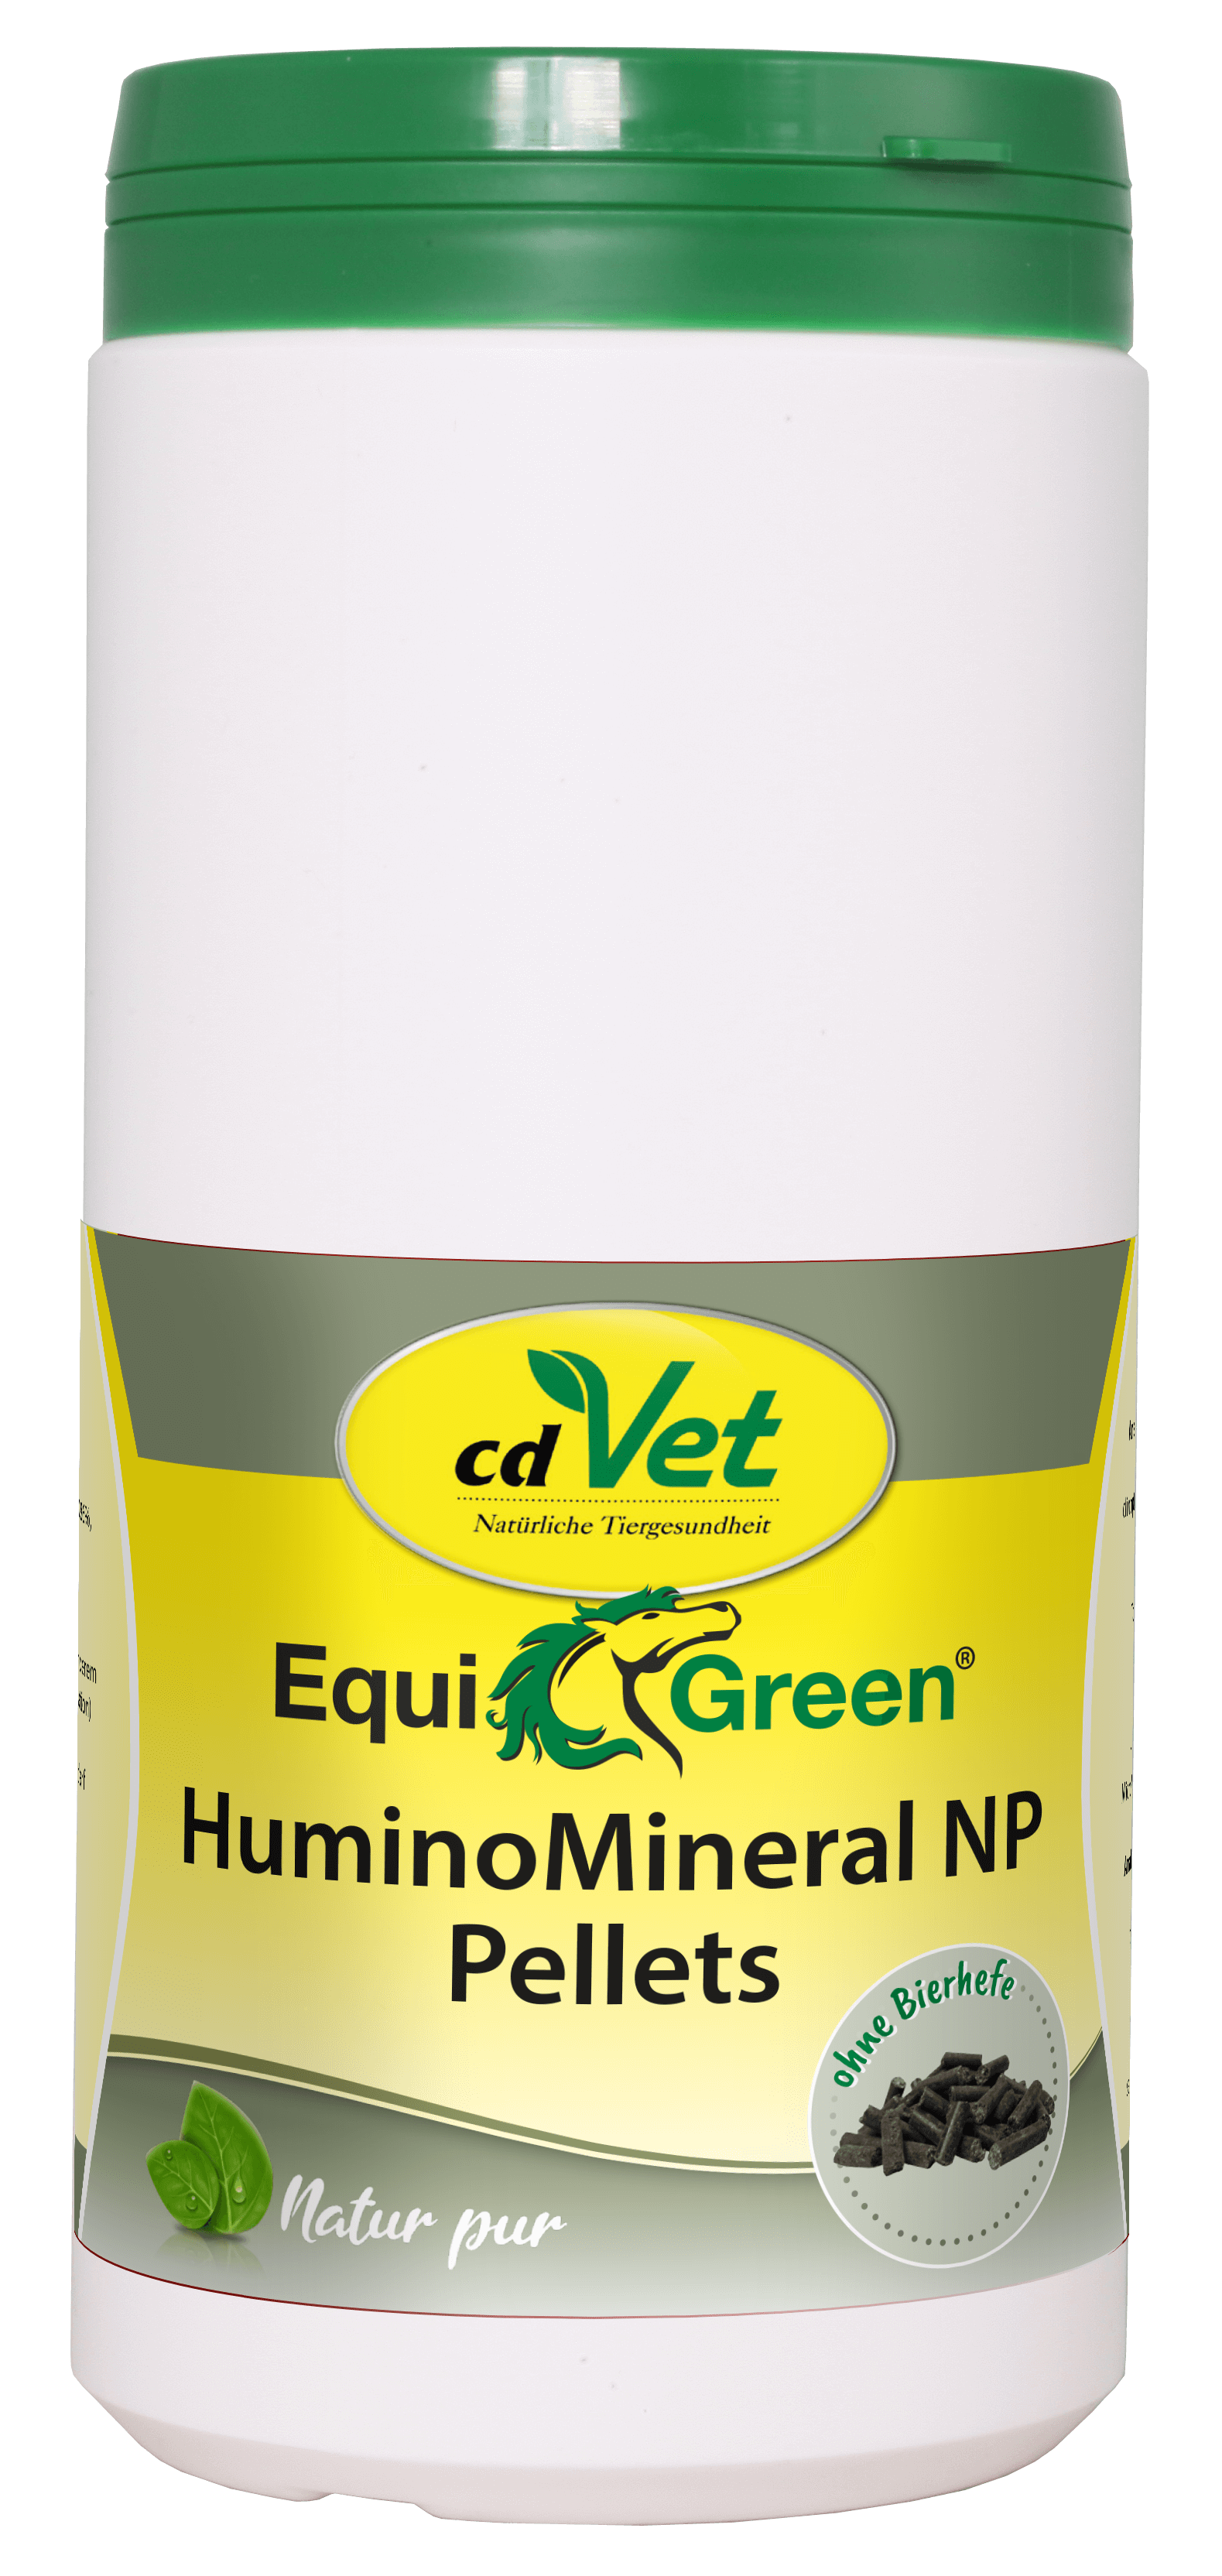 EquiGreen HuminoMineral NP Pellets 1 kg